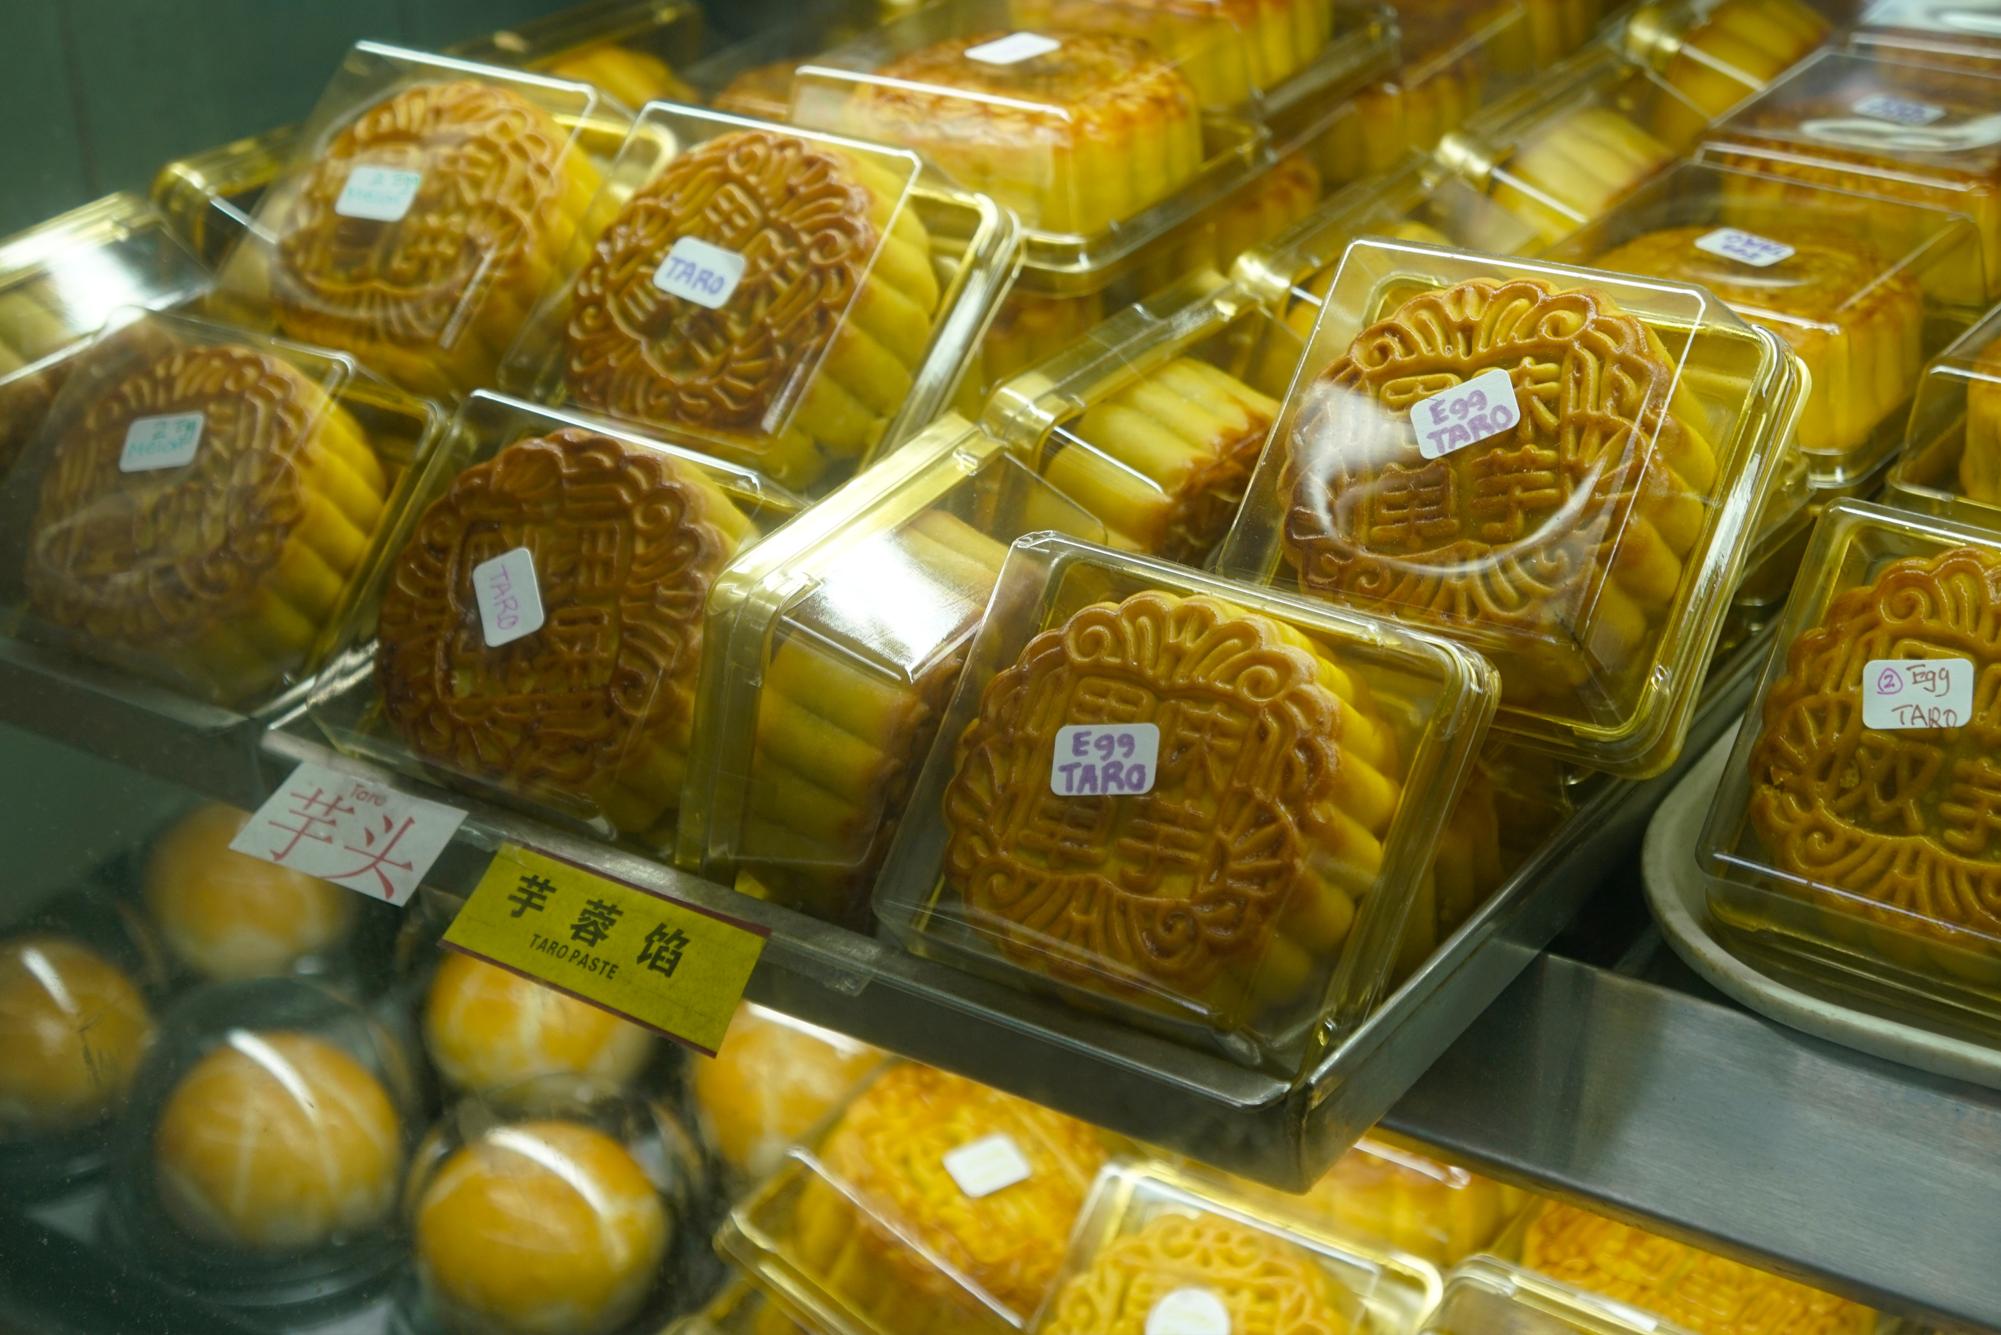 Moonstruck+for+mooncakes+at+the+Mid-Autumn+Festival